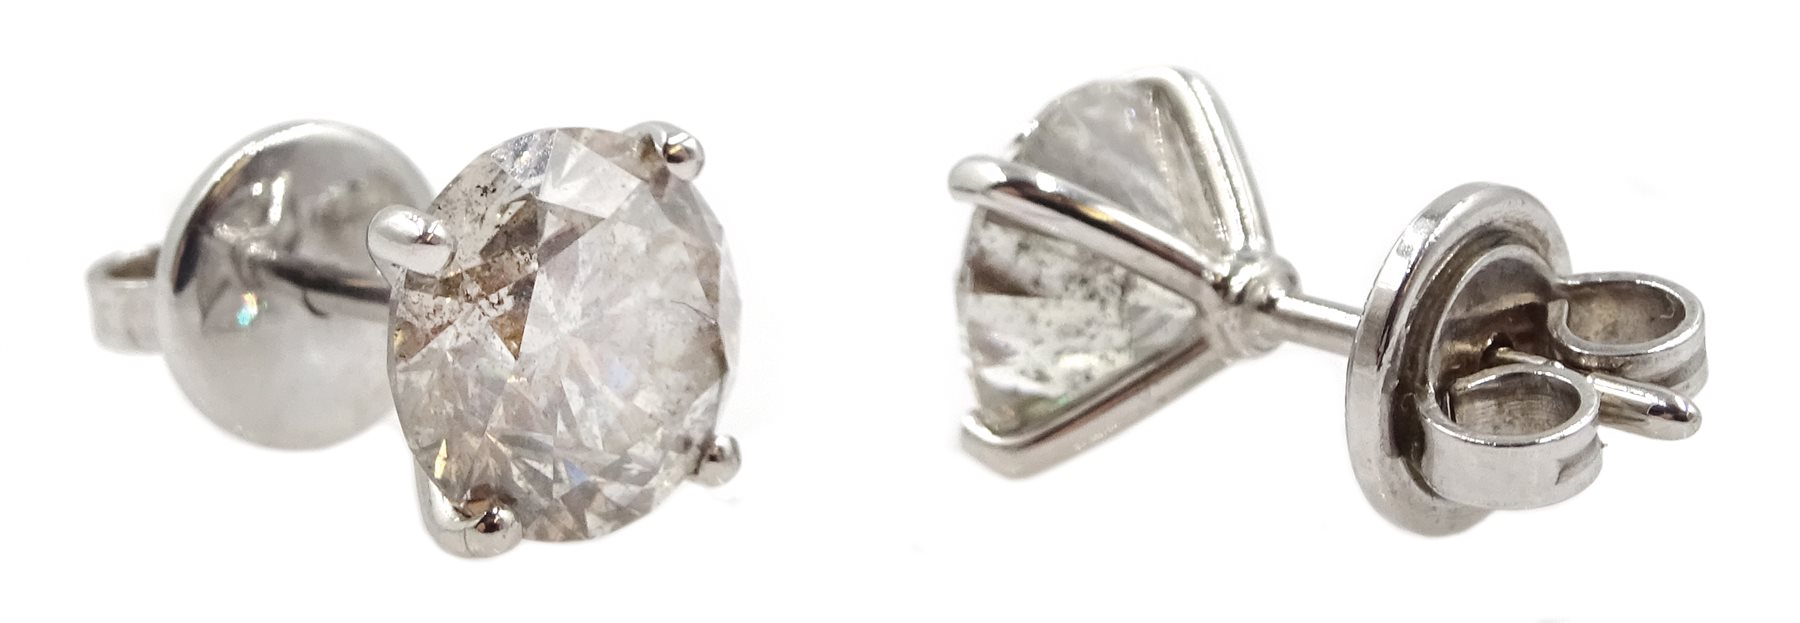 Pair of 18ct white gold diamond stud earrings, stamped 750, diamond total weight 3.52 carat - Image 2 of 4